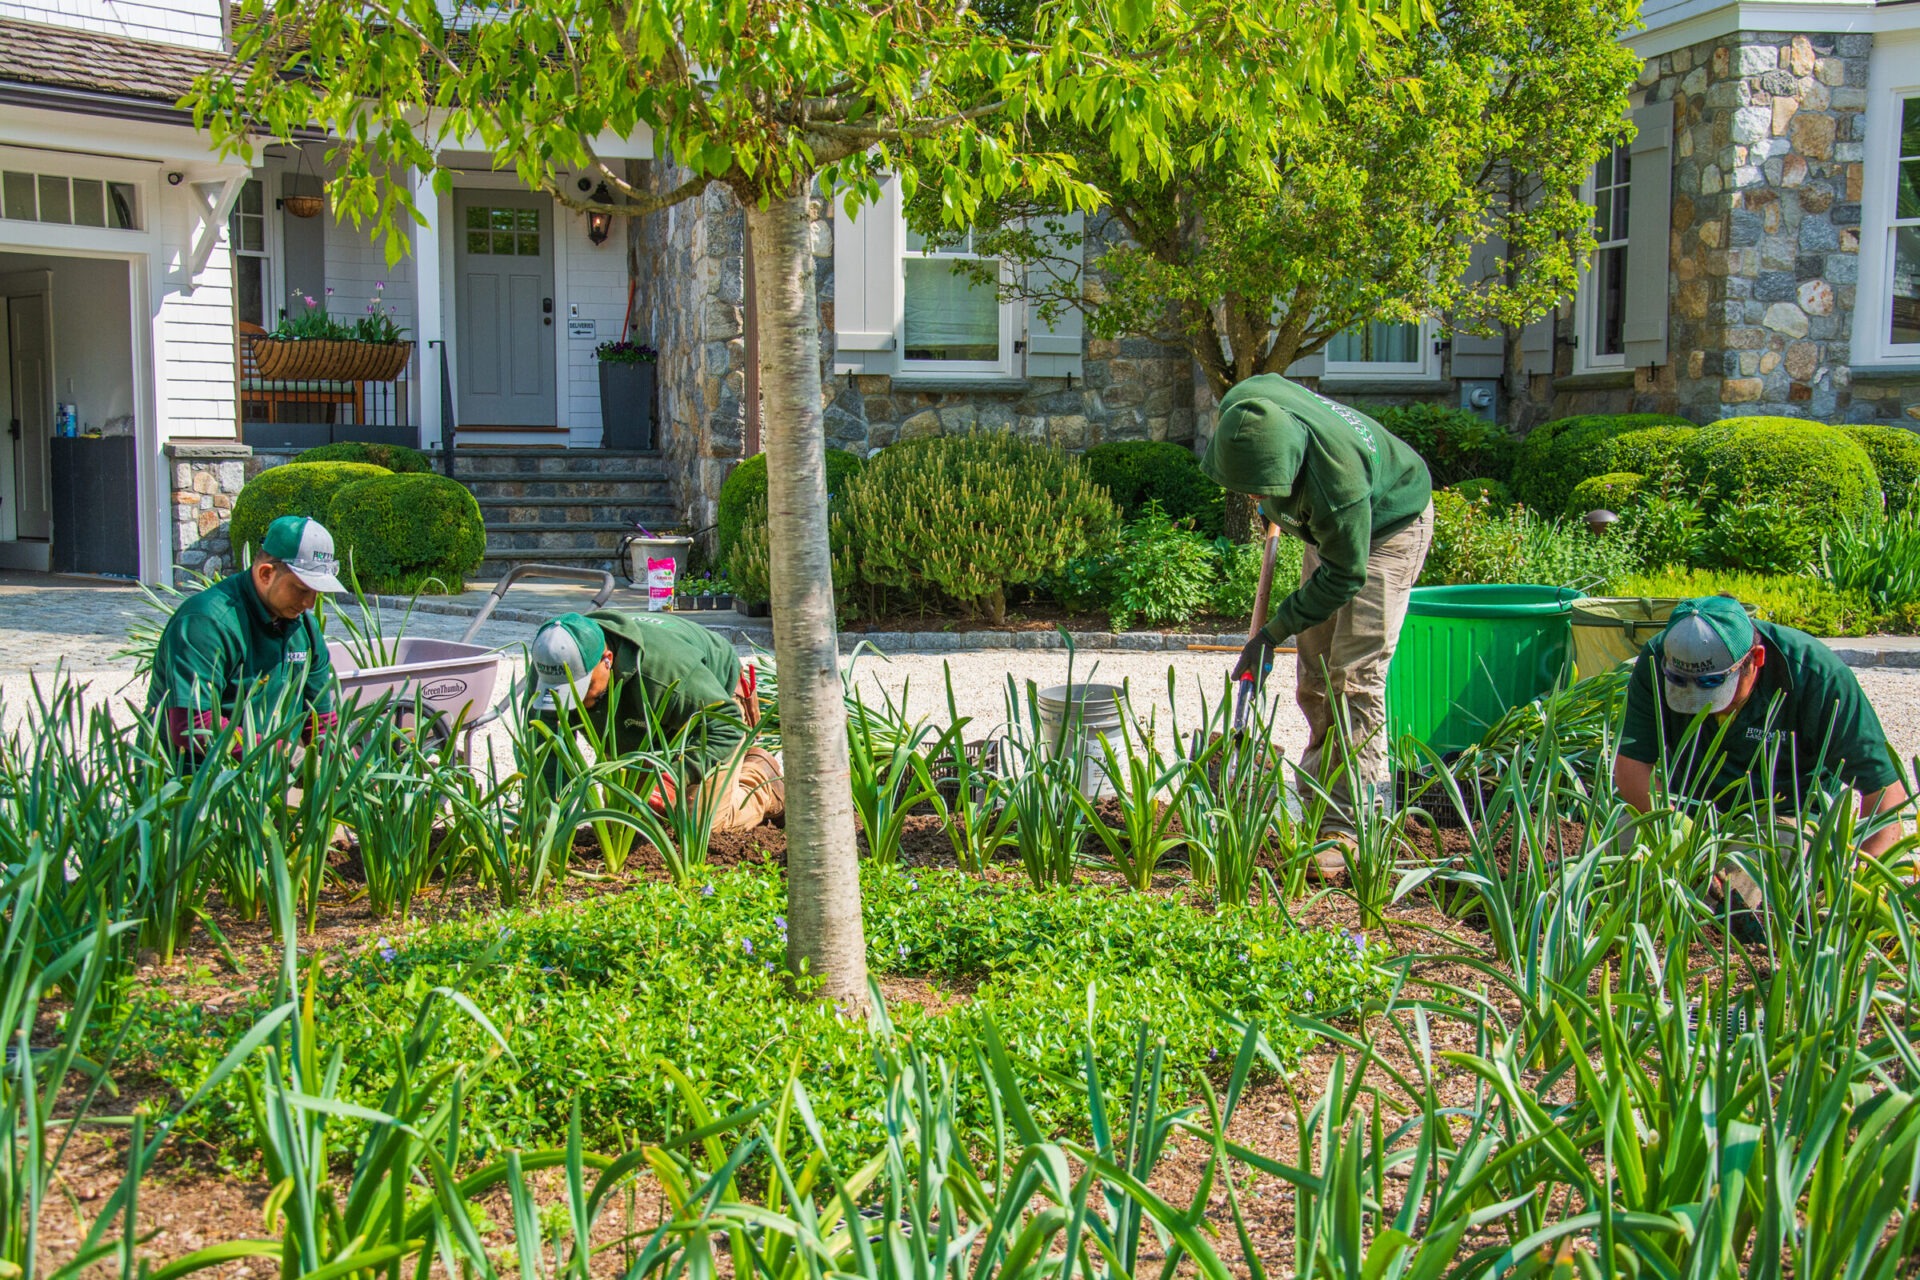 Four people in green uniforms are landscaping in front of a house with stone elements. They are planting, tending to vegetation, and using garden tools.